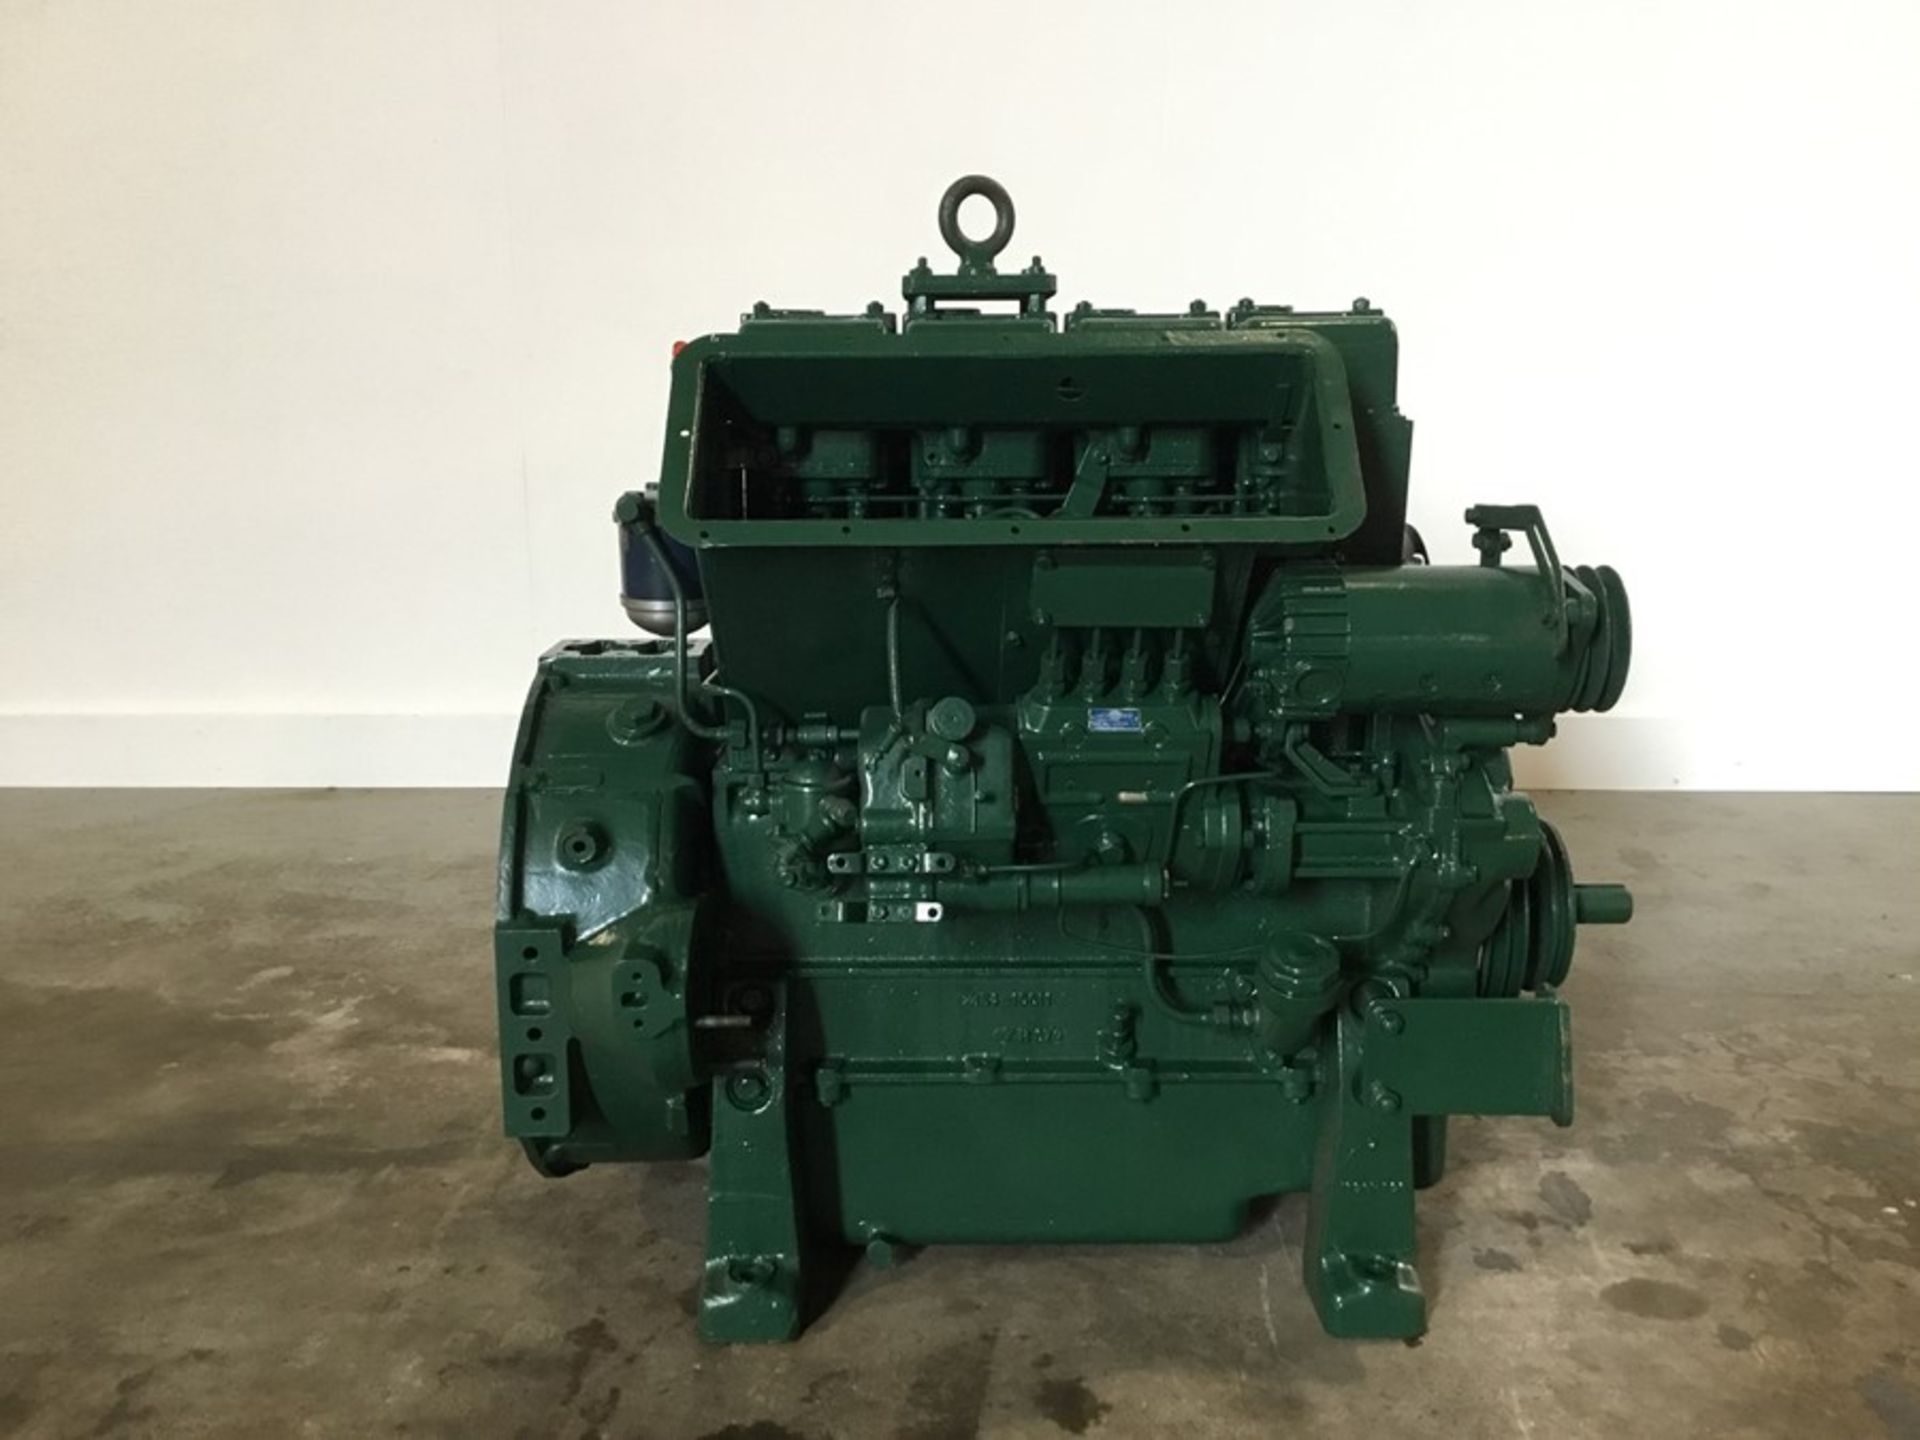 Lister 4cyl Diesel Engine: Lister 4cyl non turbo low hours - Image 6 of 18